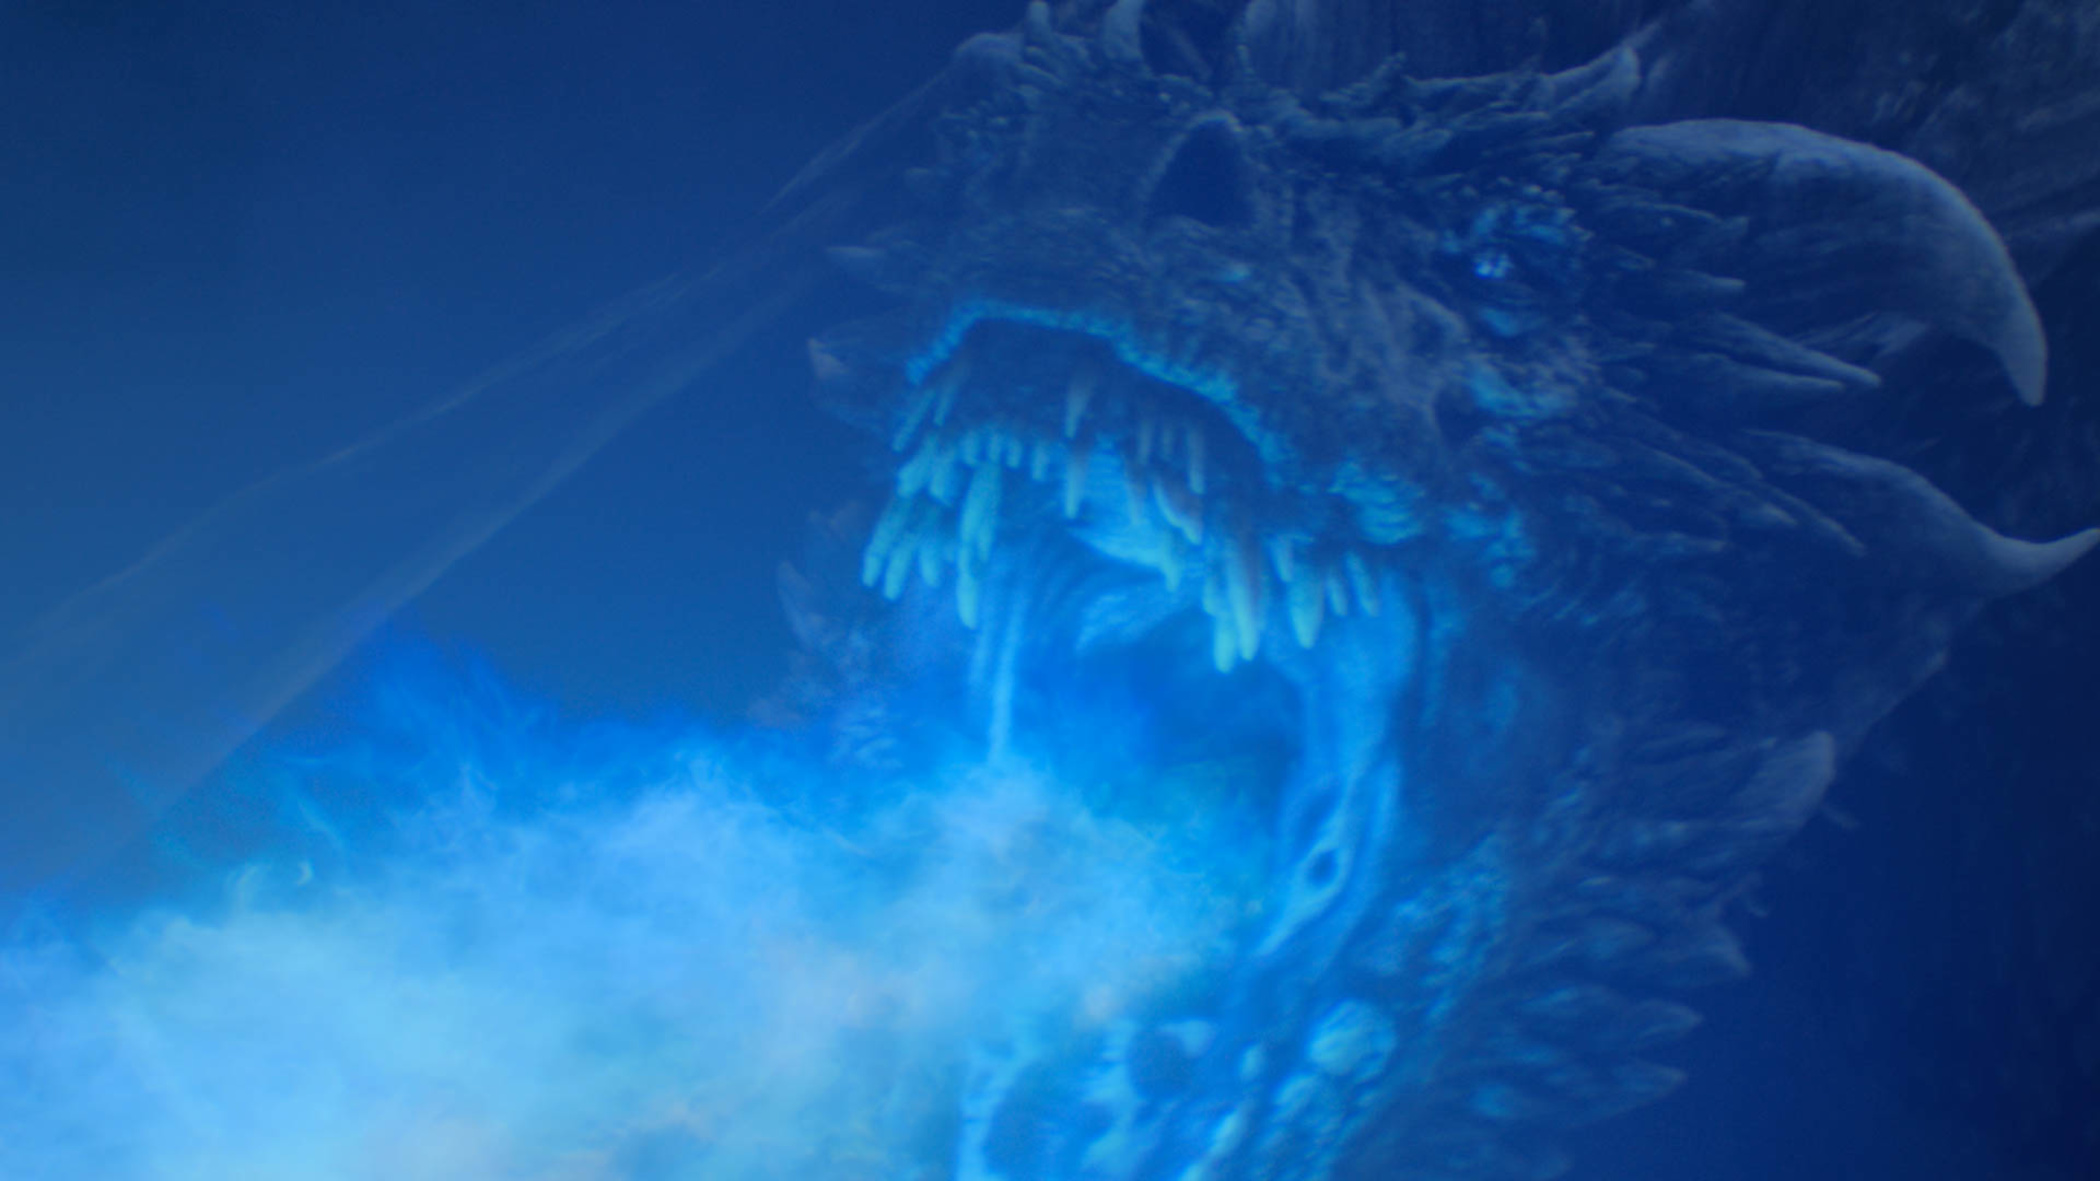 Viserion puts up a fight on Game of Thrones season 8 episode 3